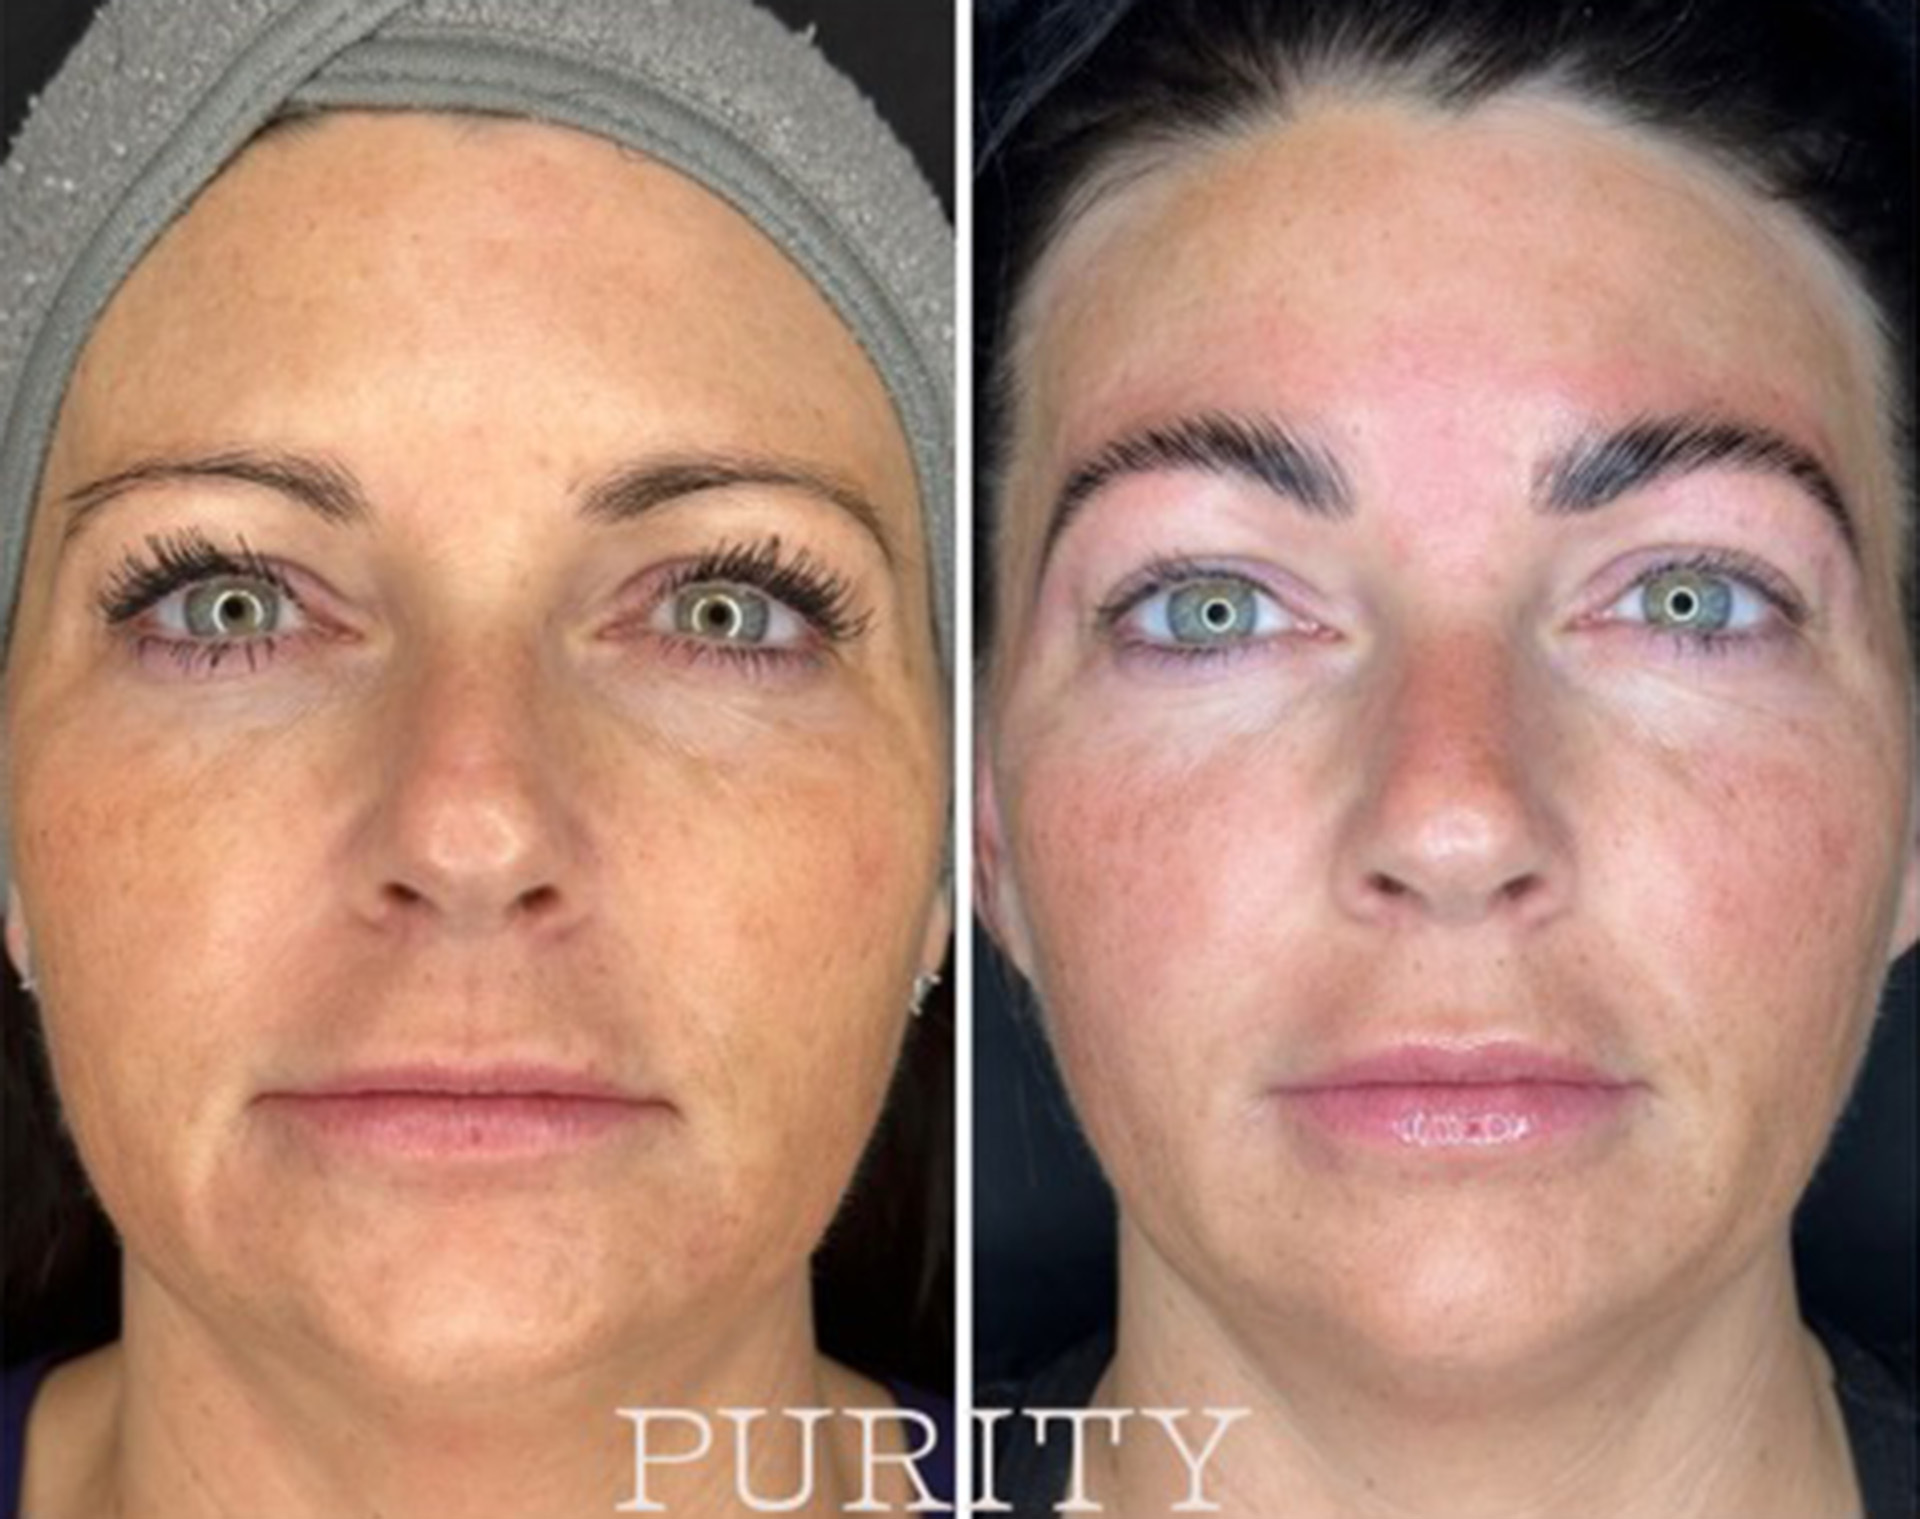 Skin treatment before and after results image